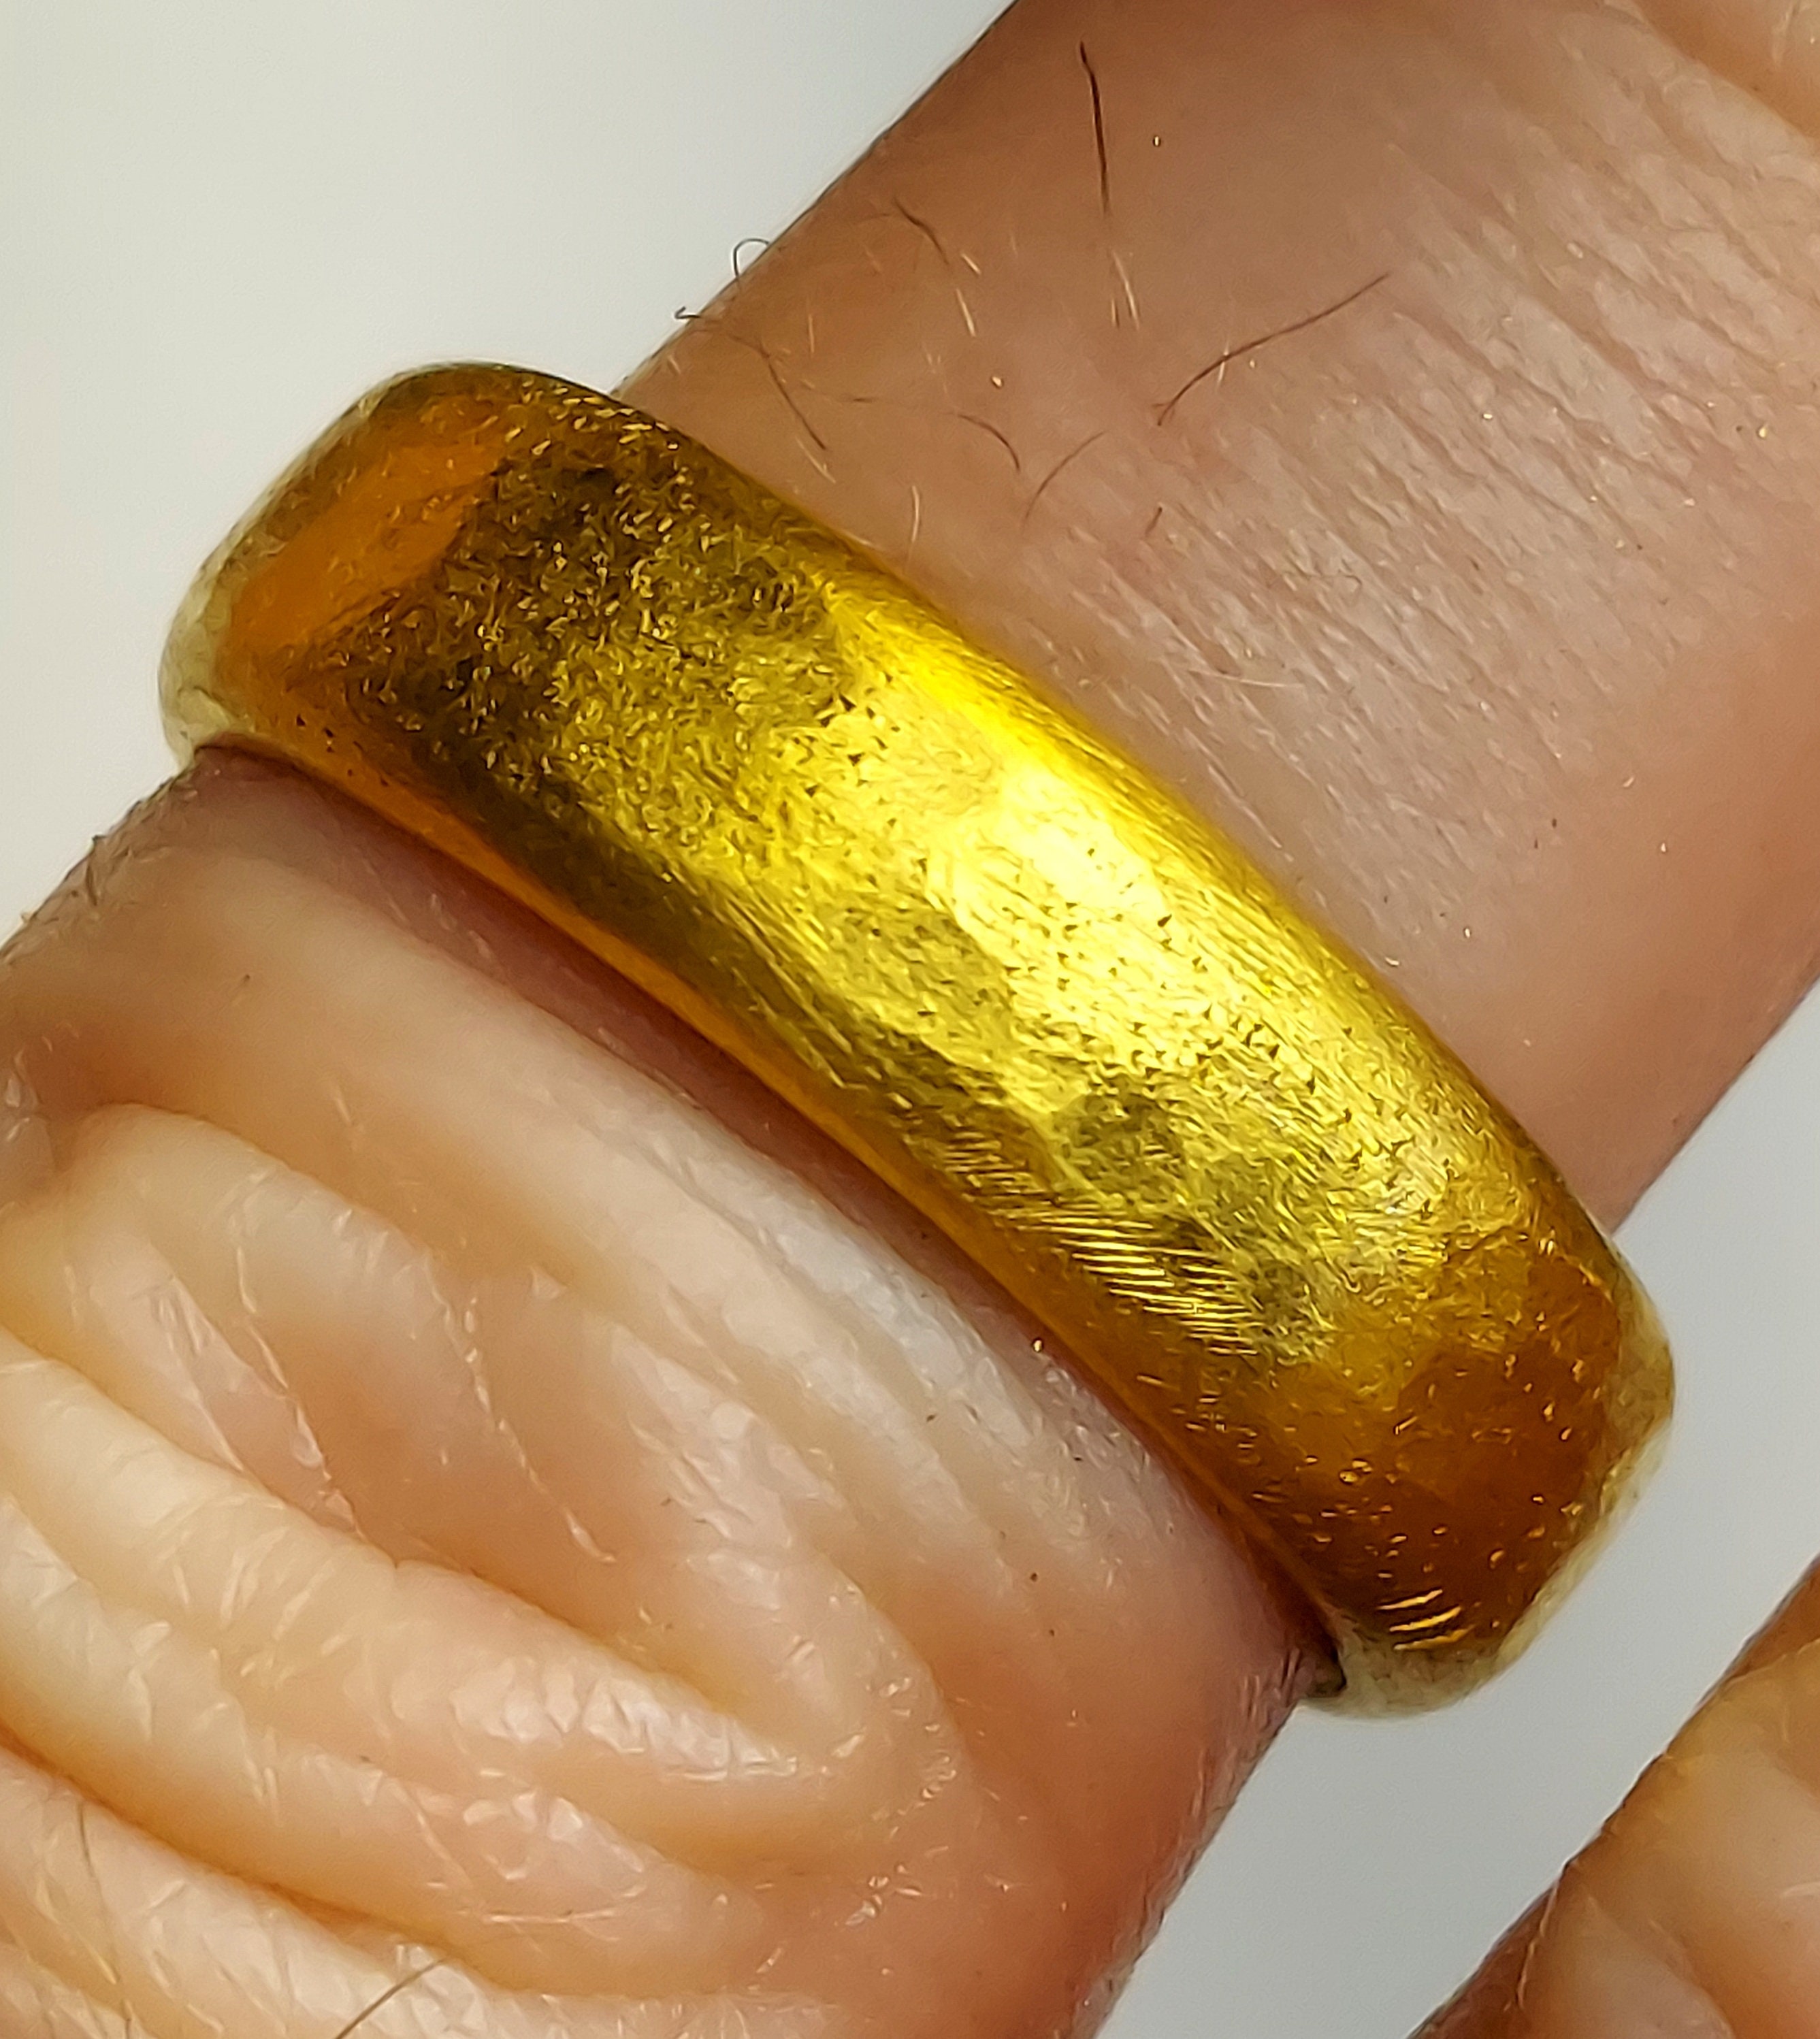 Buy Suisse Gold Ring, Lady Fortuna Gold Ring, PAMP Suisse Ring, 24 K Suisse  Gold Ring, Suisse Bar Ring, 1 Gram Suisse Fine Gold, Swiss Gold Bar Online  in India - Etsy